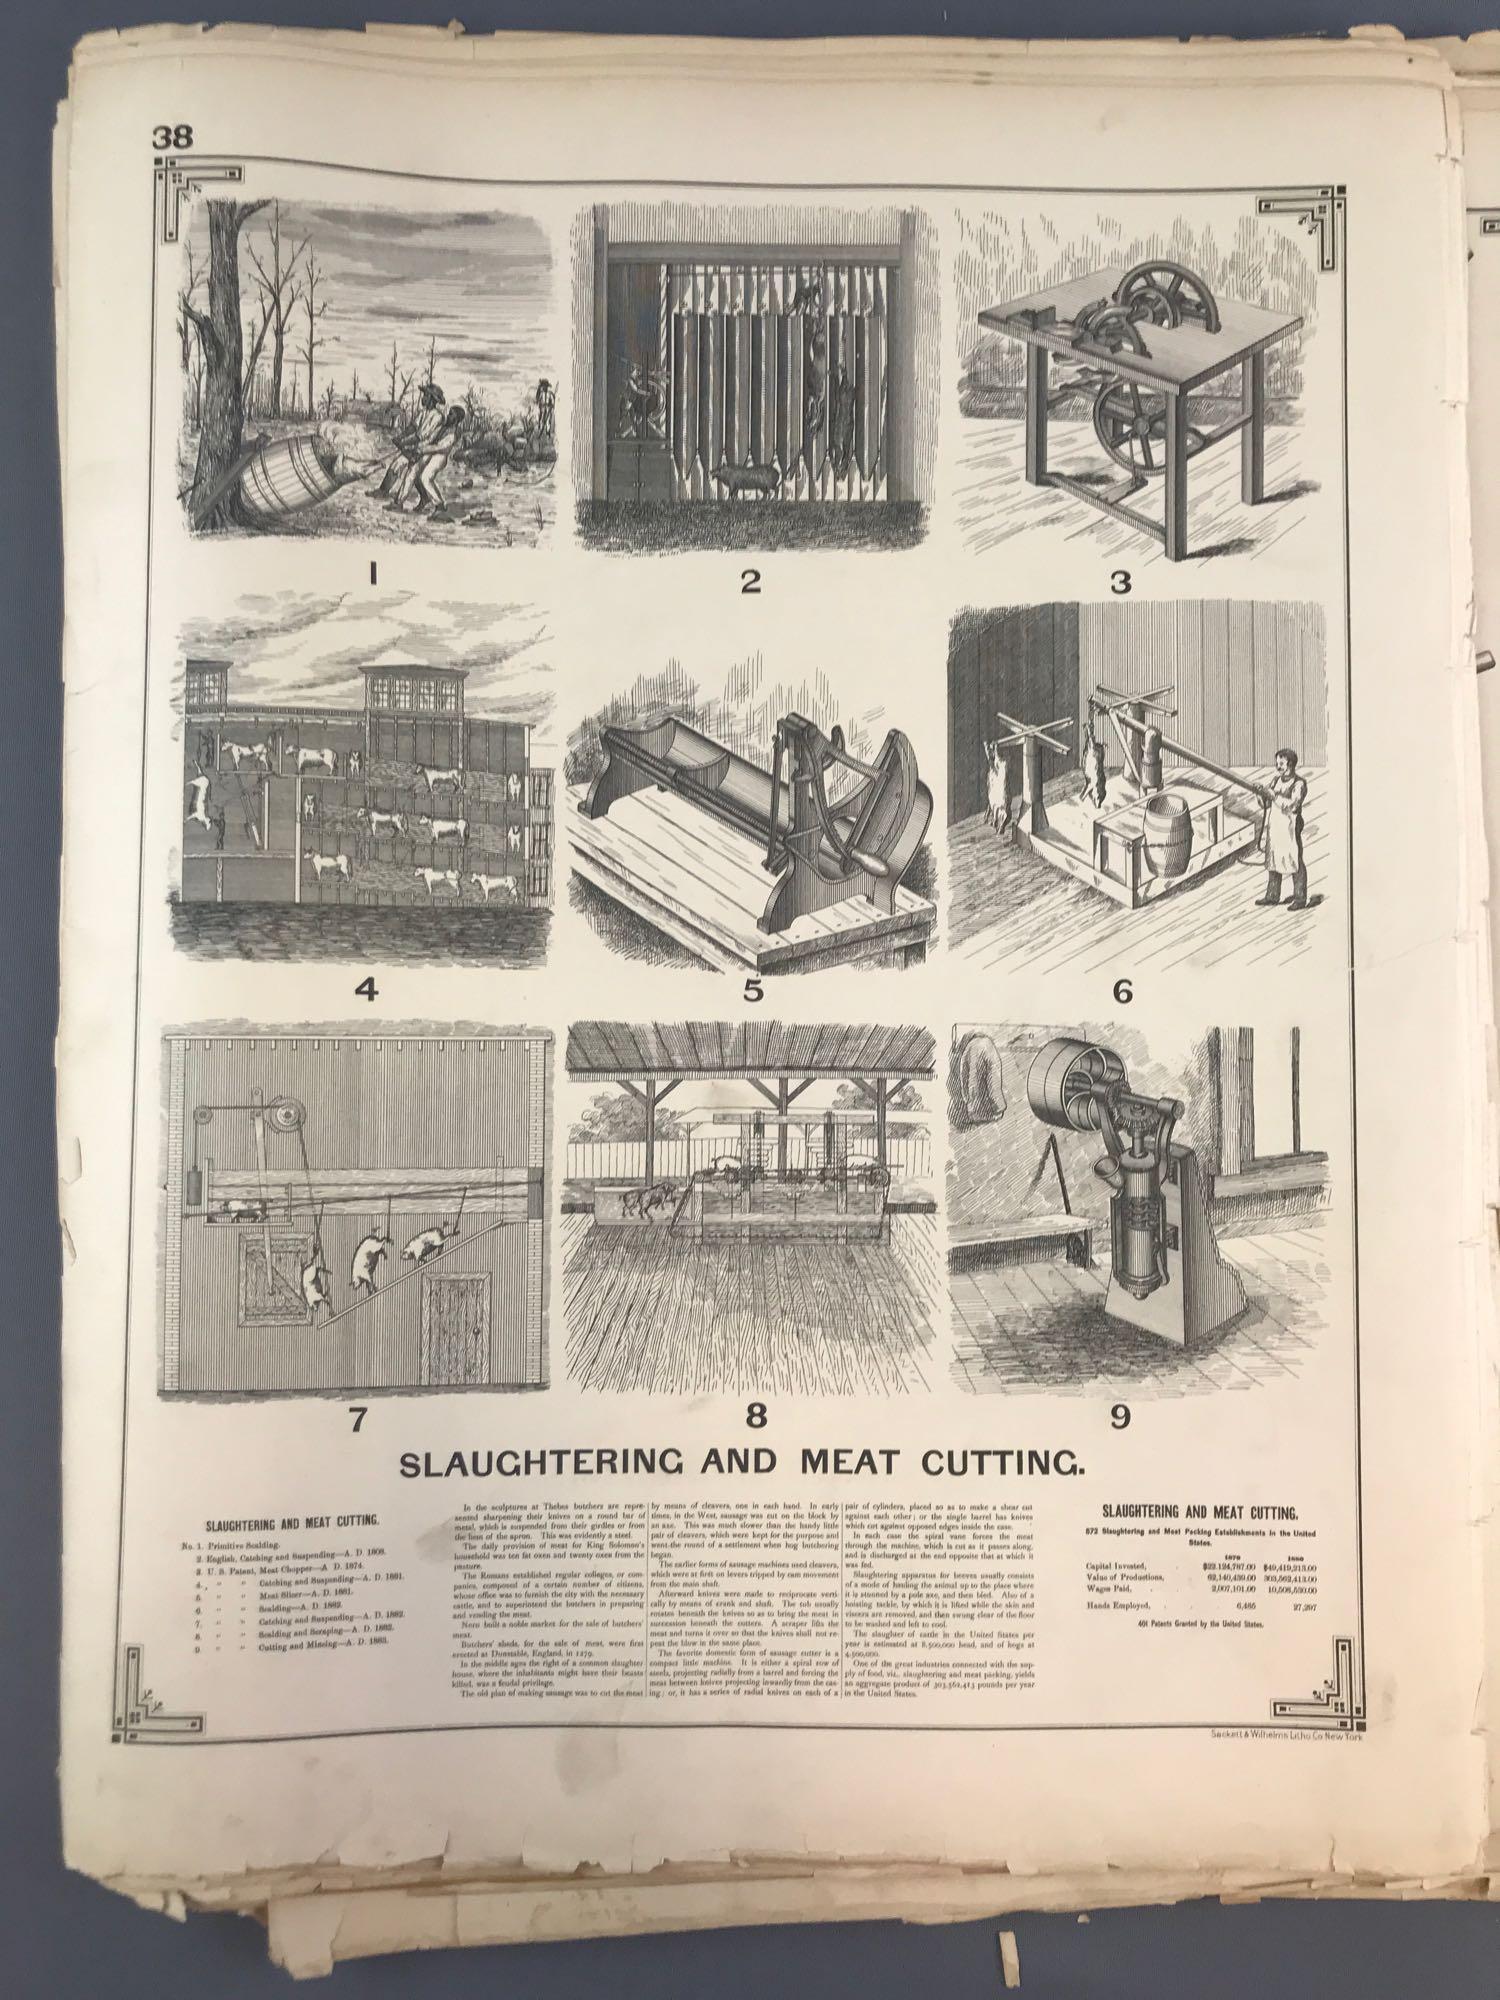 Industrial Encyclopedia of machines and tools